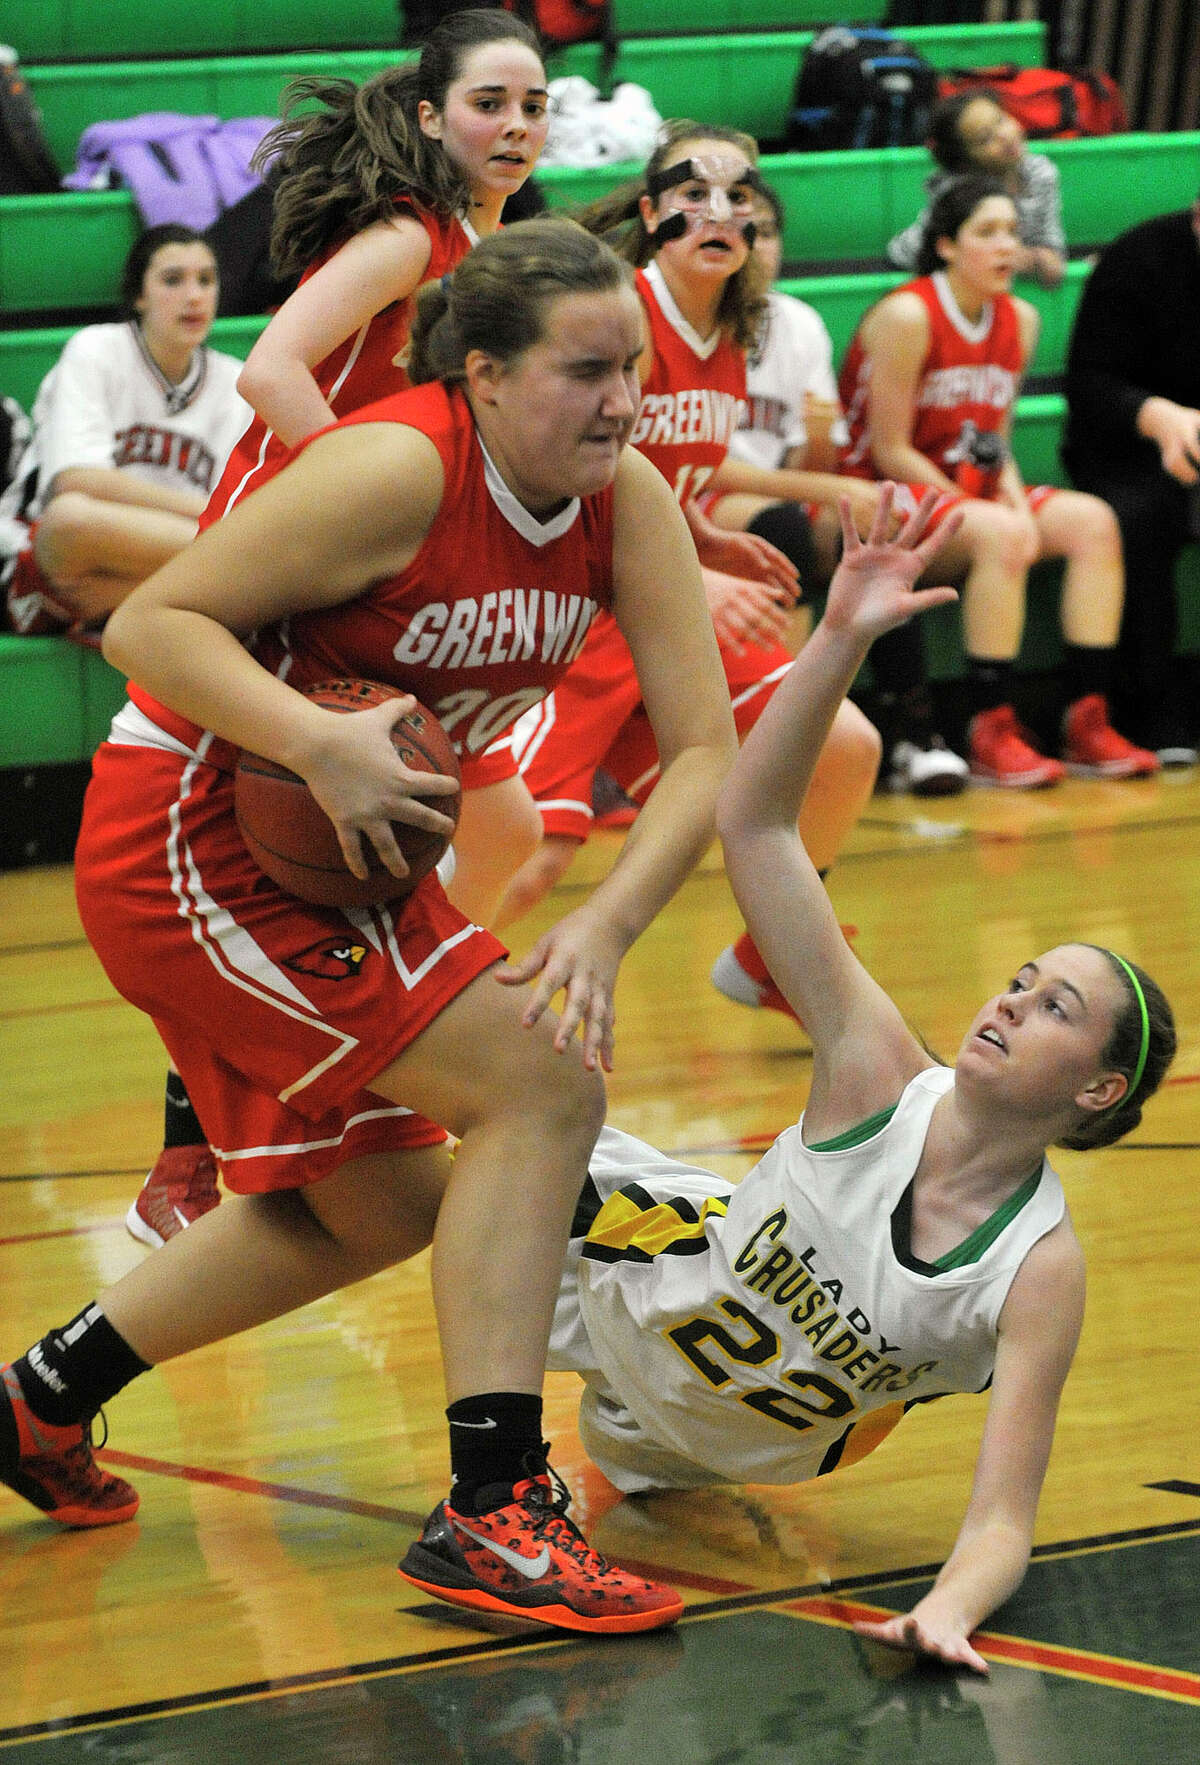 Greenwich's Emily Anderson dribbles around the diving Anne Peltier, of Trinity Catholic, during their game at Trinity Catholic High School in Stamford, Conn., on Wednesday, Dec. 11, 2013. Greenwich won, 68-32.